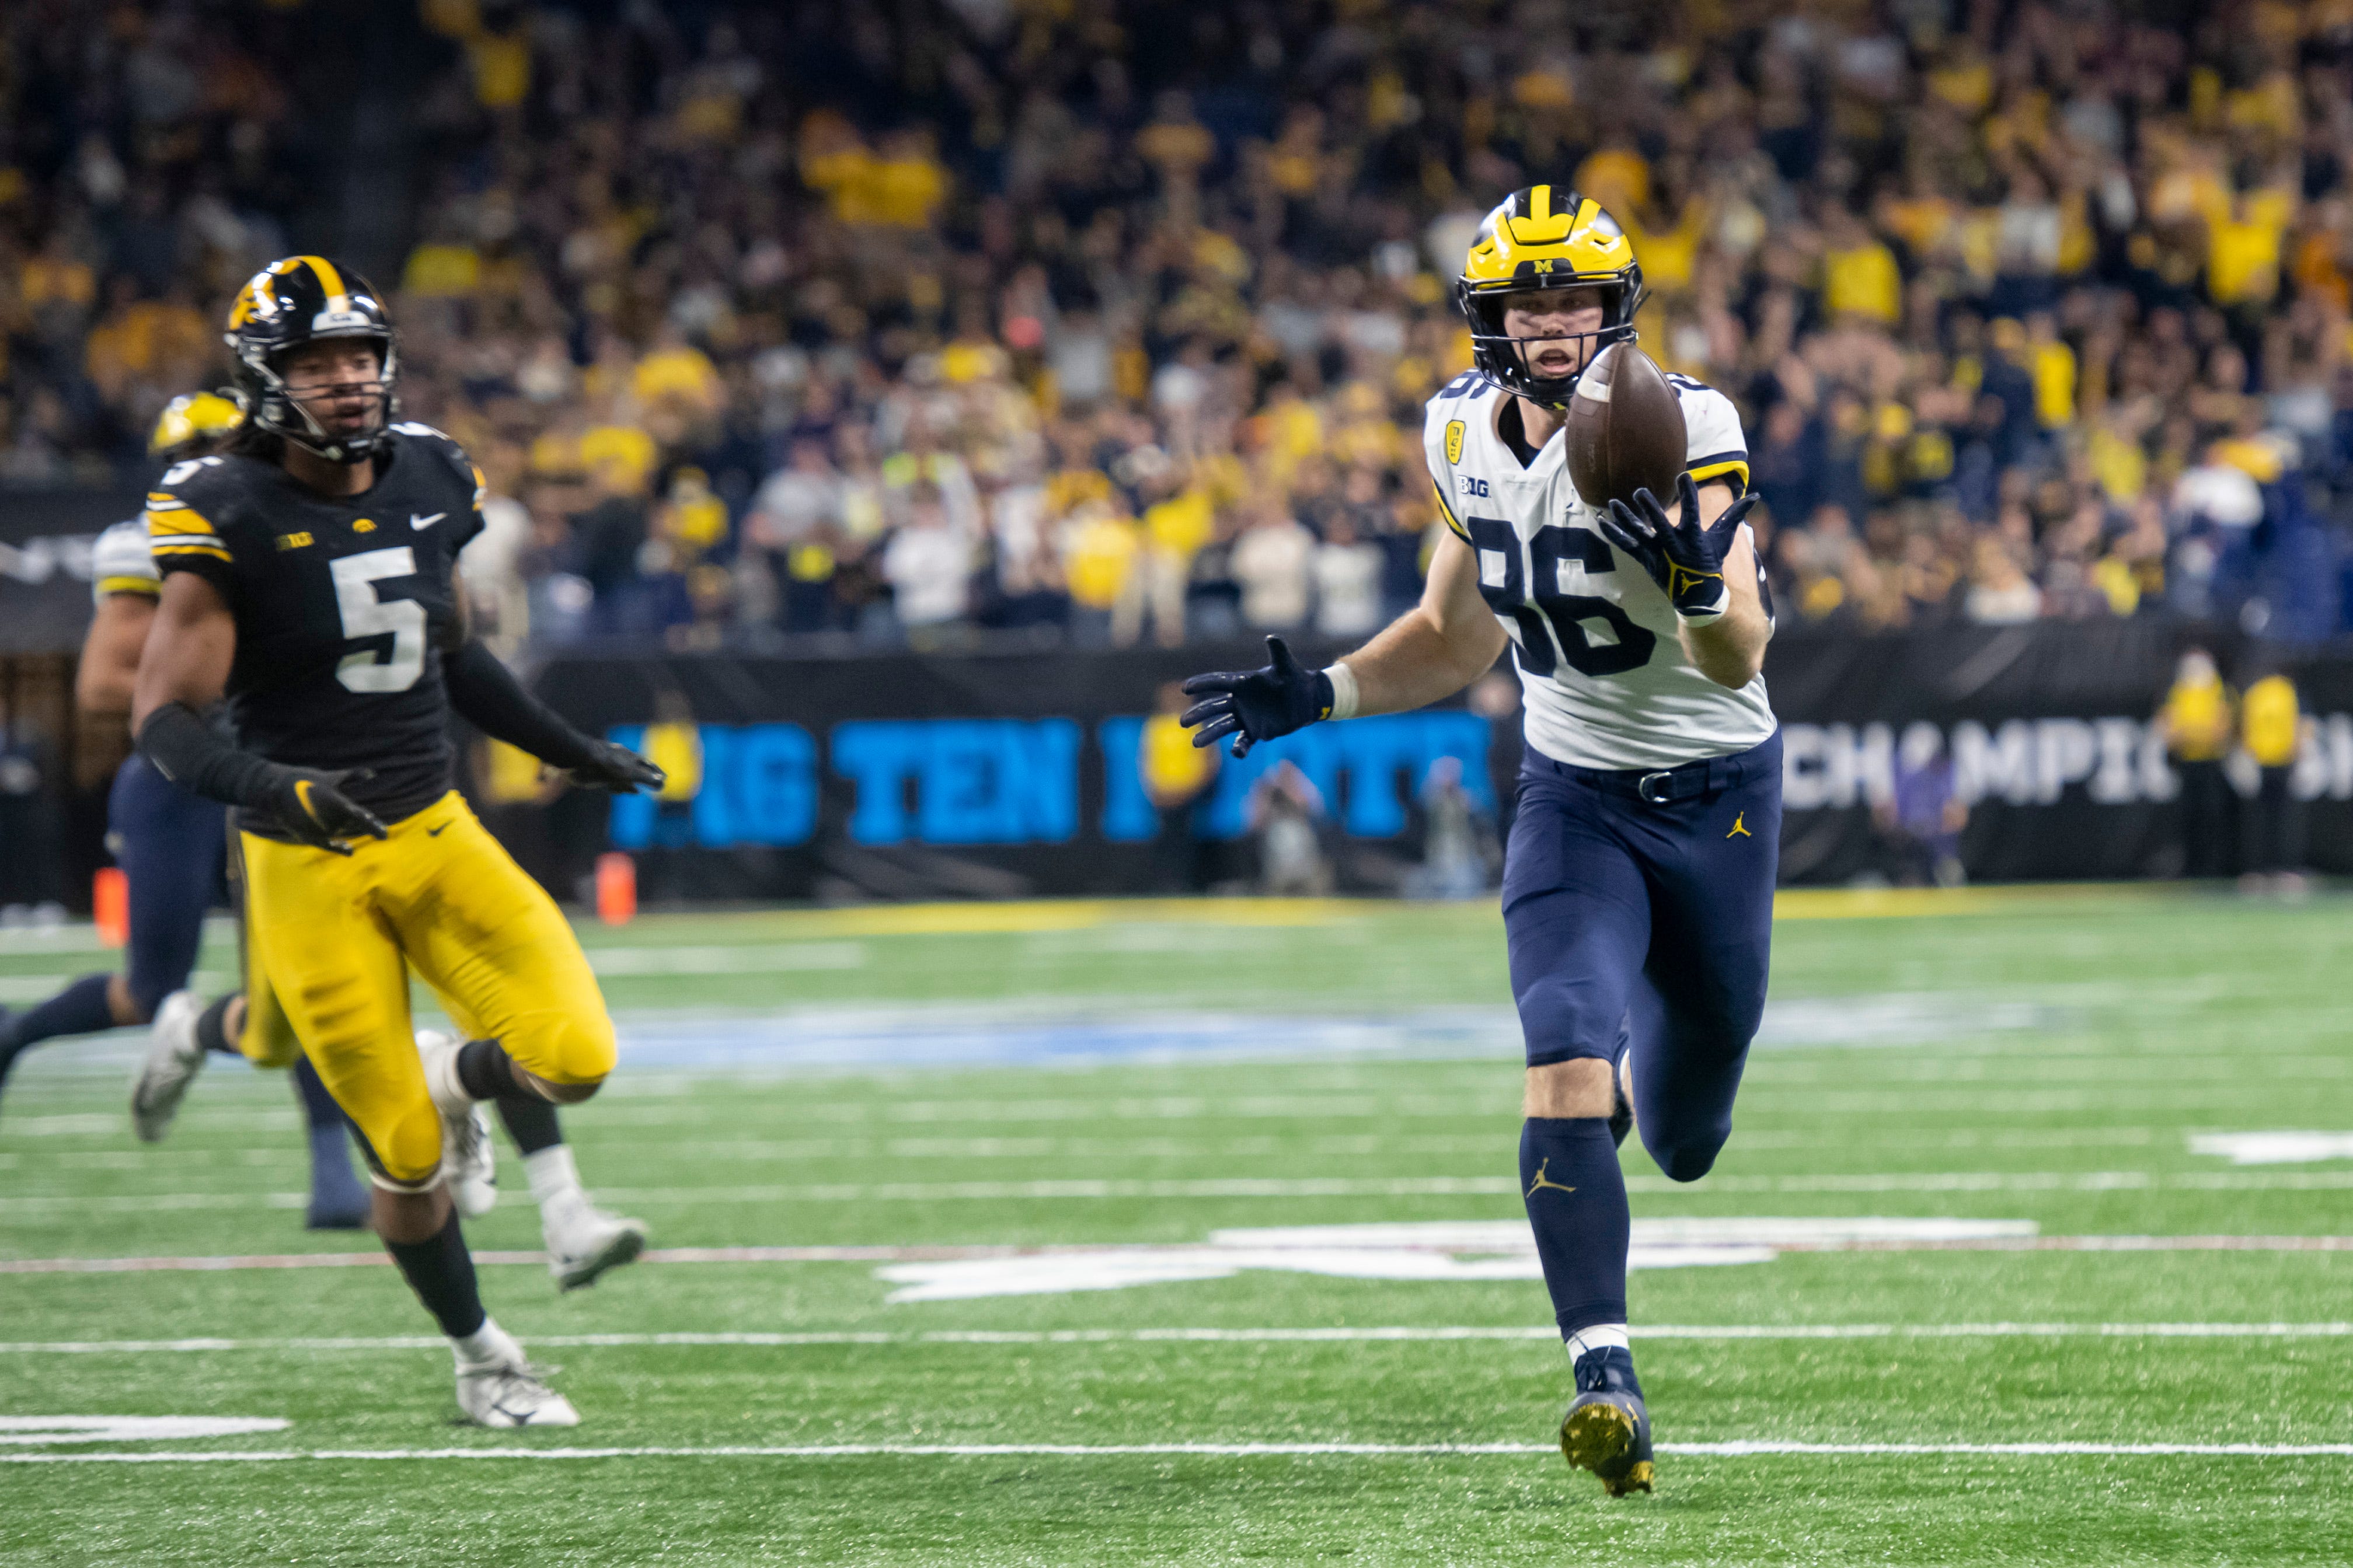 Michigan tight end Luke Schoonmaker hauls in a pass during the fourth quarter.